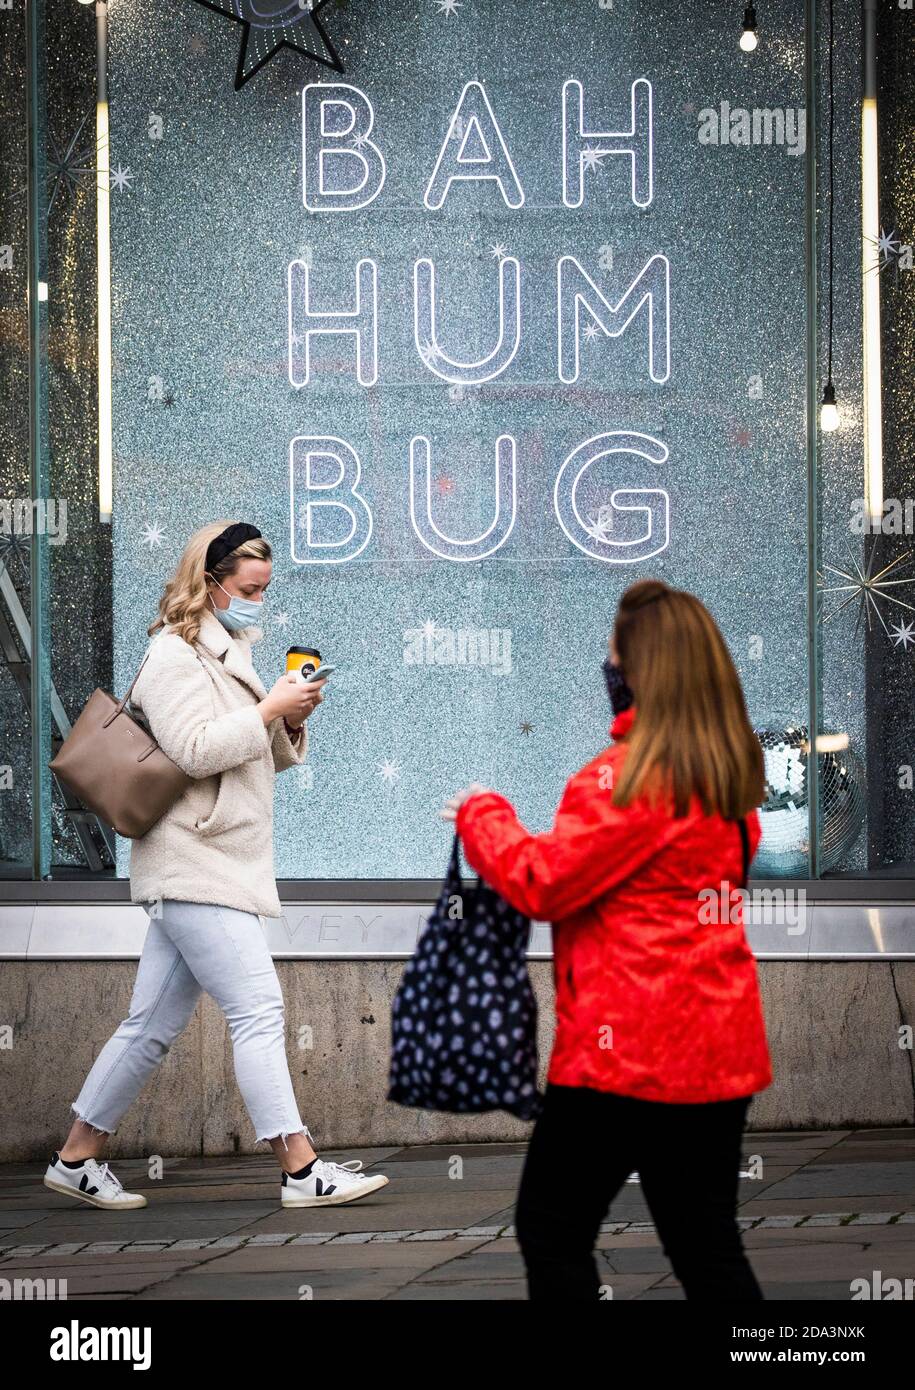 A shopper wearing a protective face mask walks past a shop sign that read 'Bah Humbug' in Edinburgh city centre. Scotland is currently using a tier system to try and drive down coronavirus cases. Stock Photo